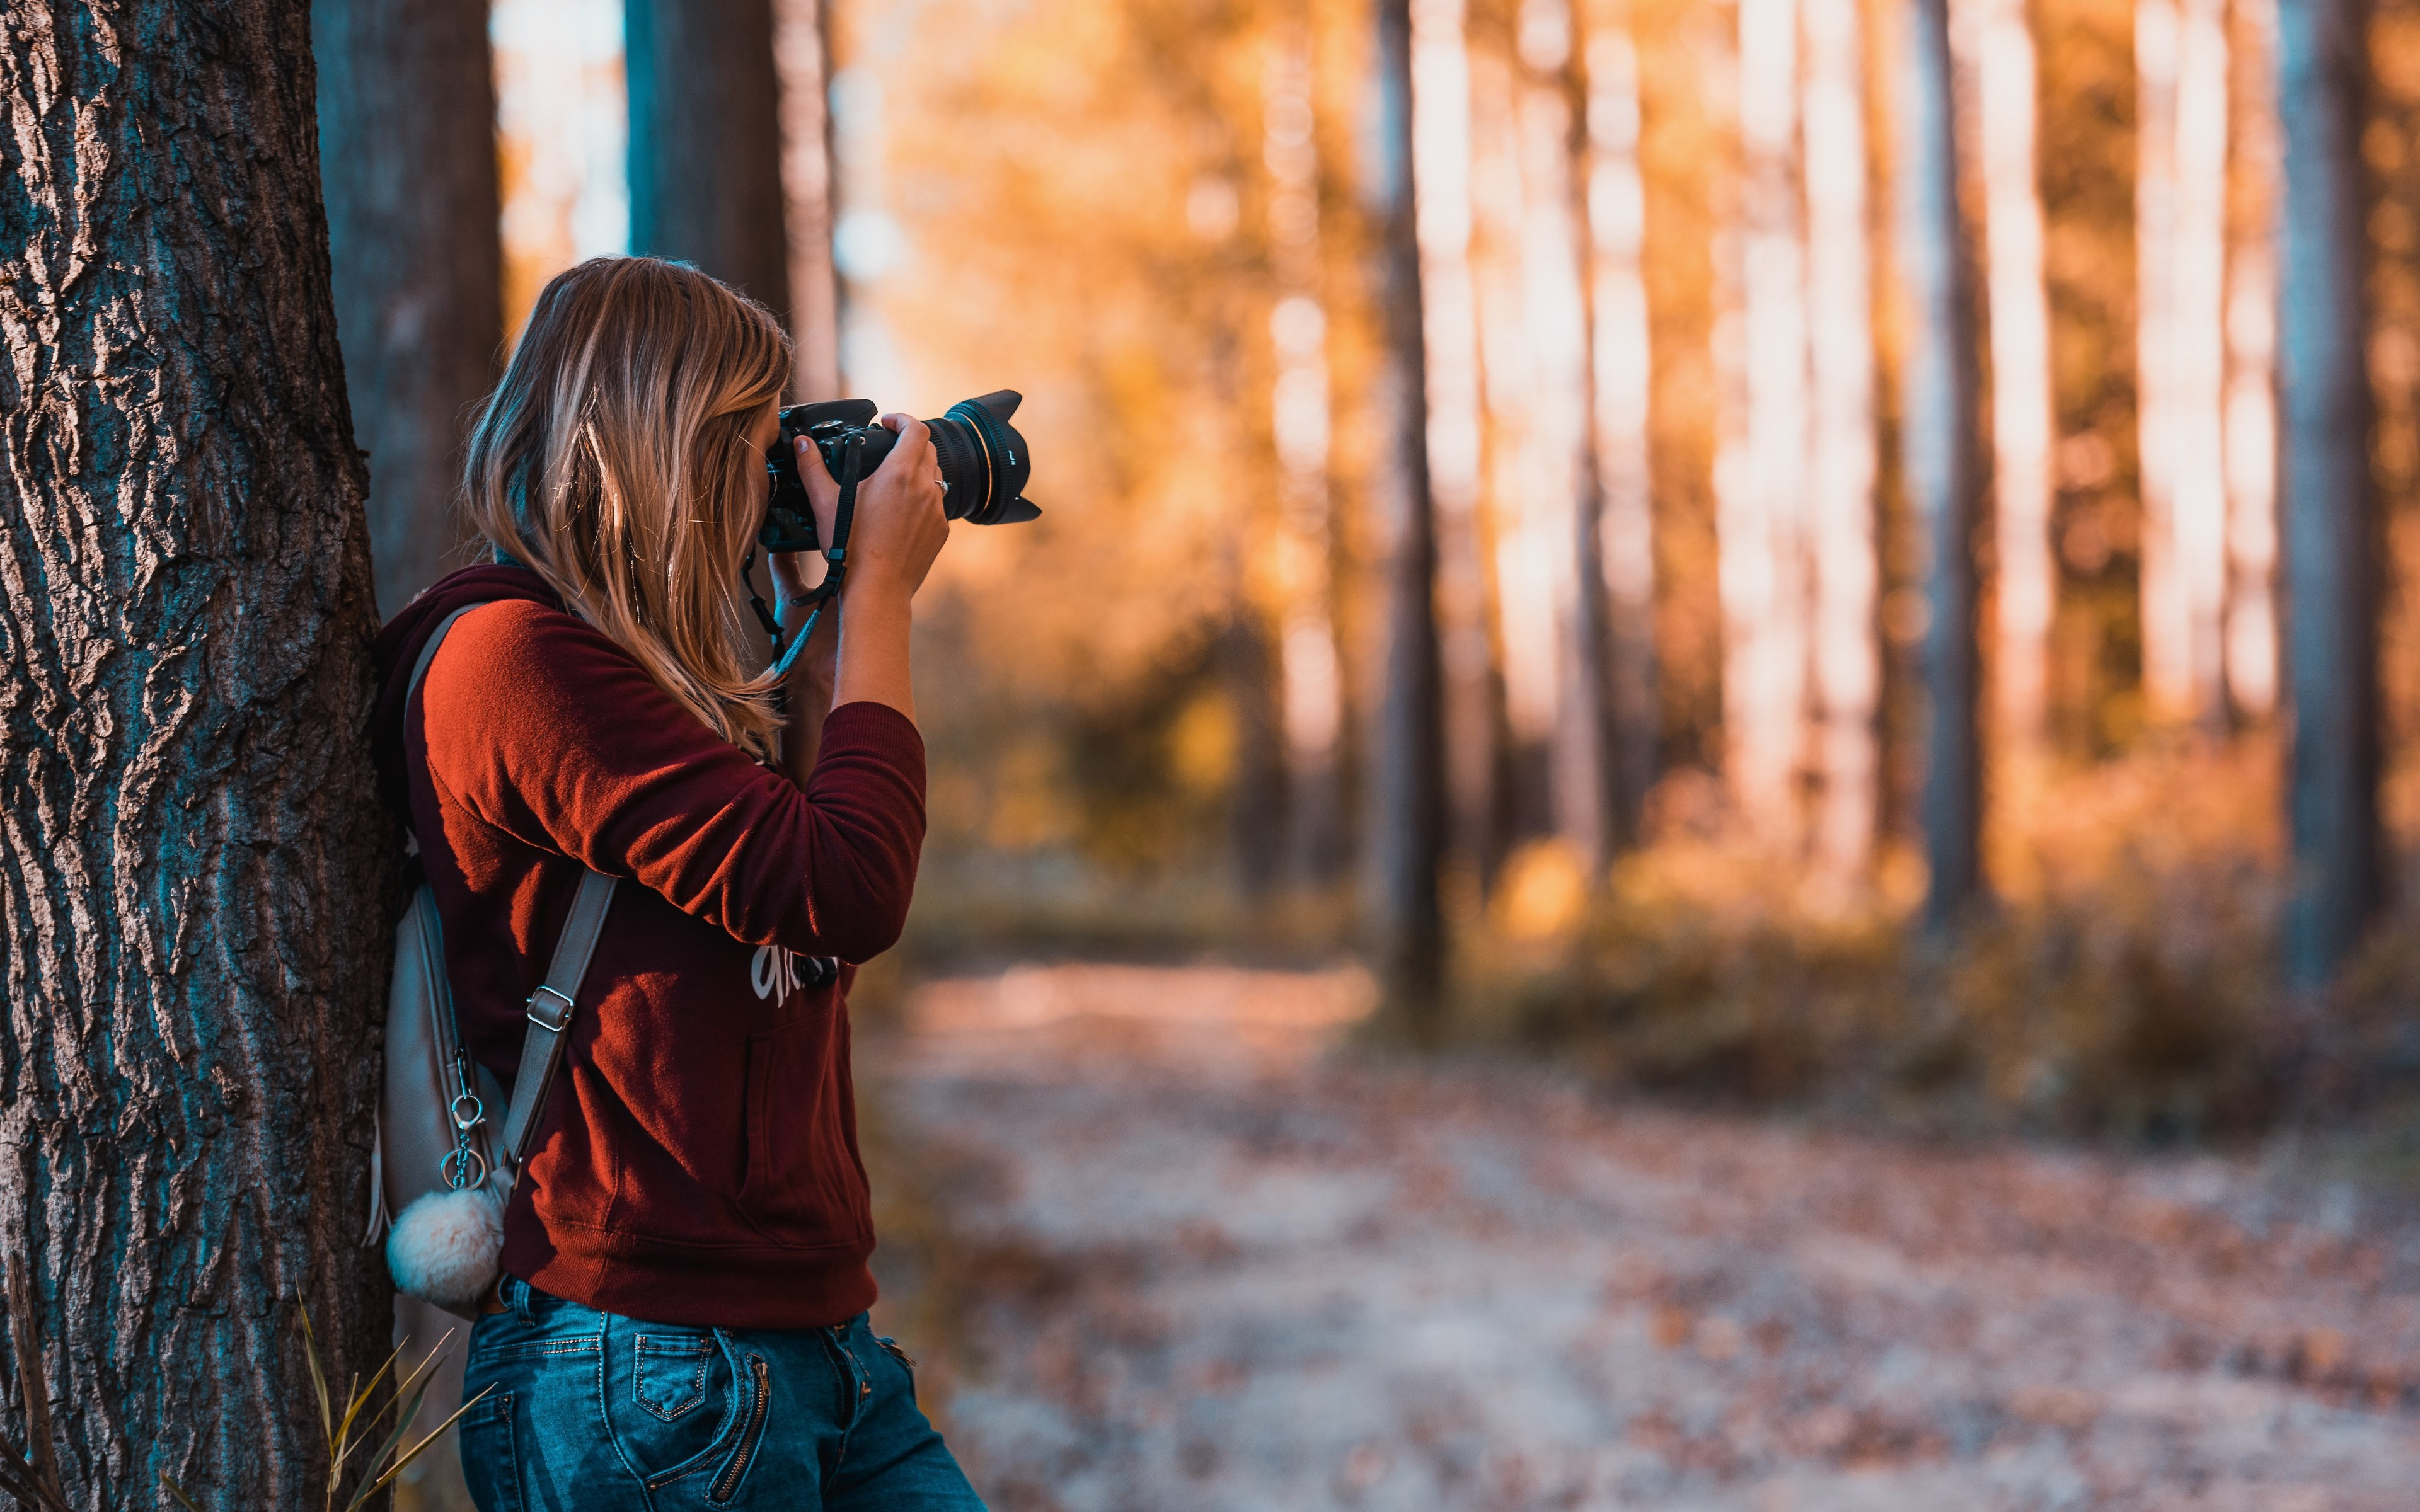 Photographer takes pictures in nature wallpaper 3840x2400